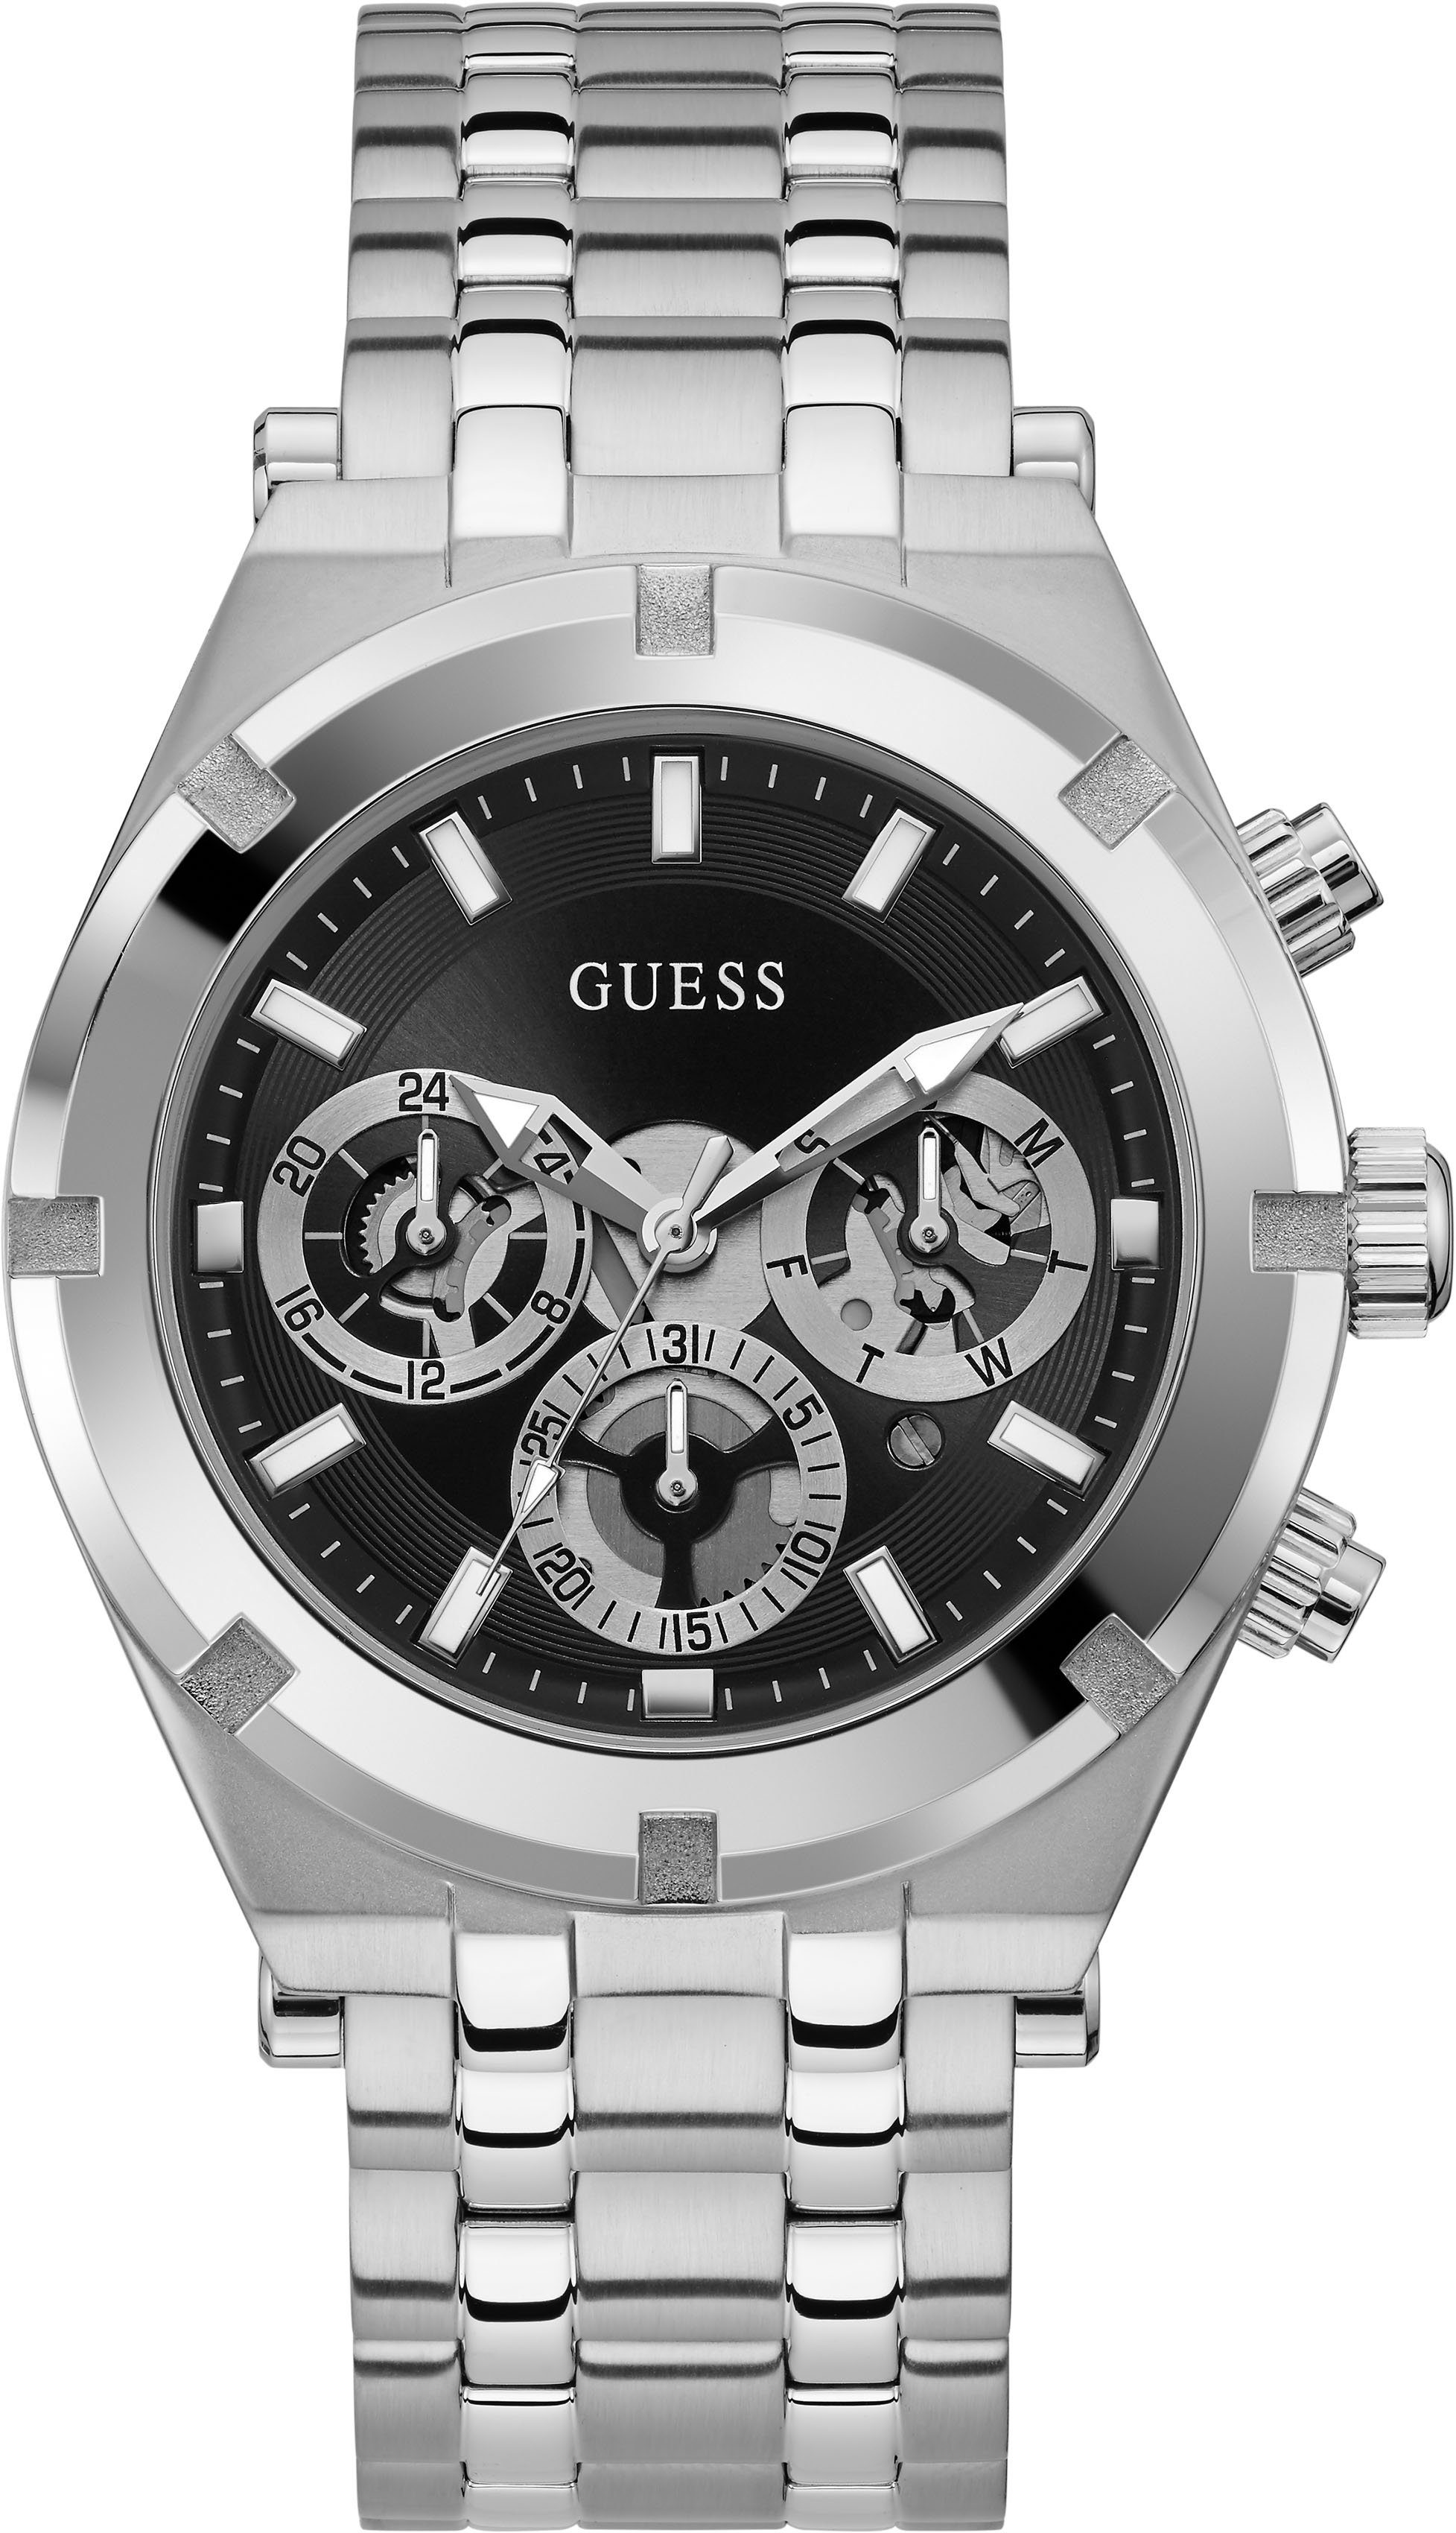 Multifunktionsuhr CONTINENTAL, Guess GW0260G1